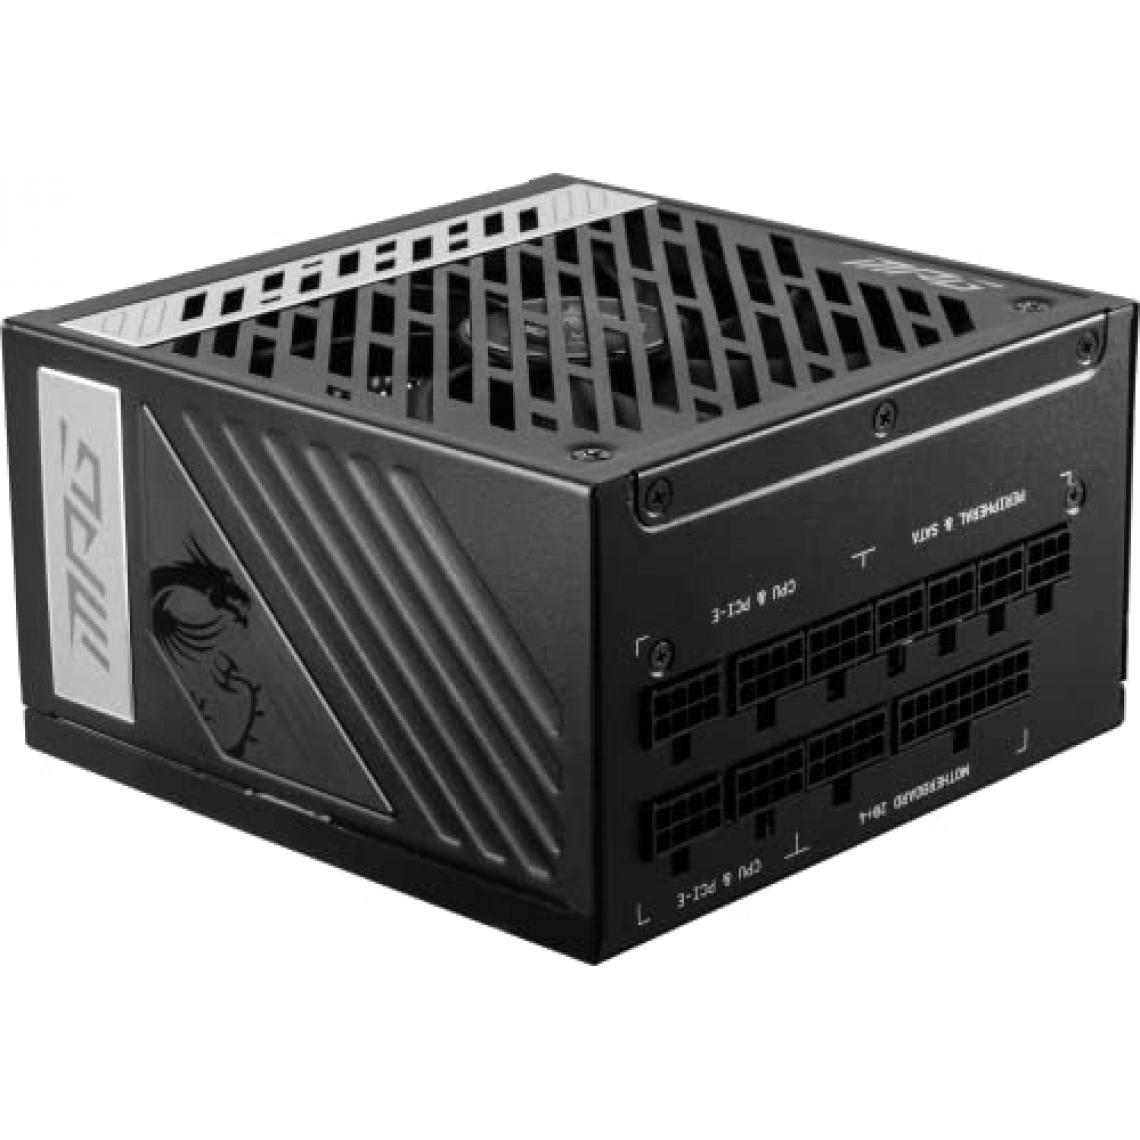 Msi - MPG A1000G - 1000W - Alimentation modulaire